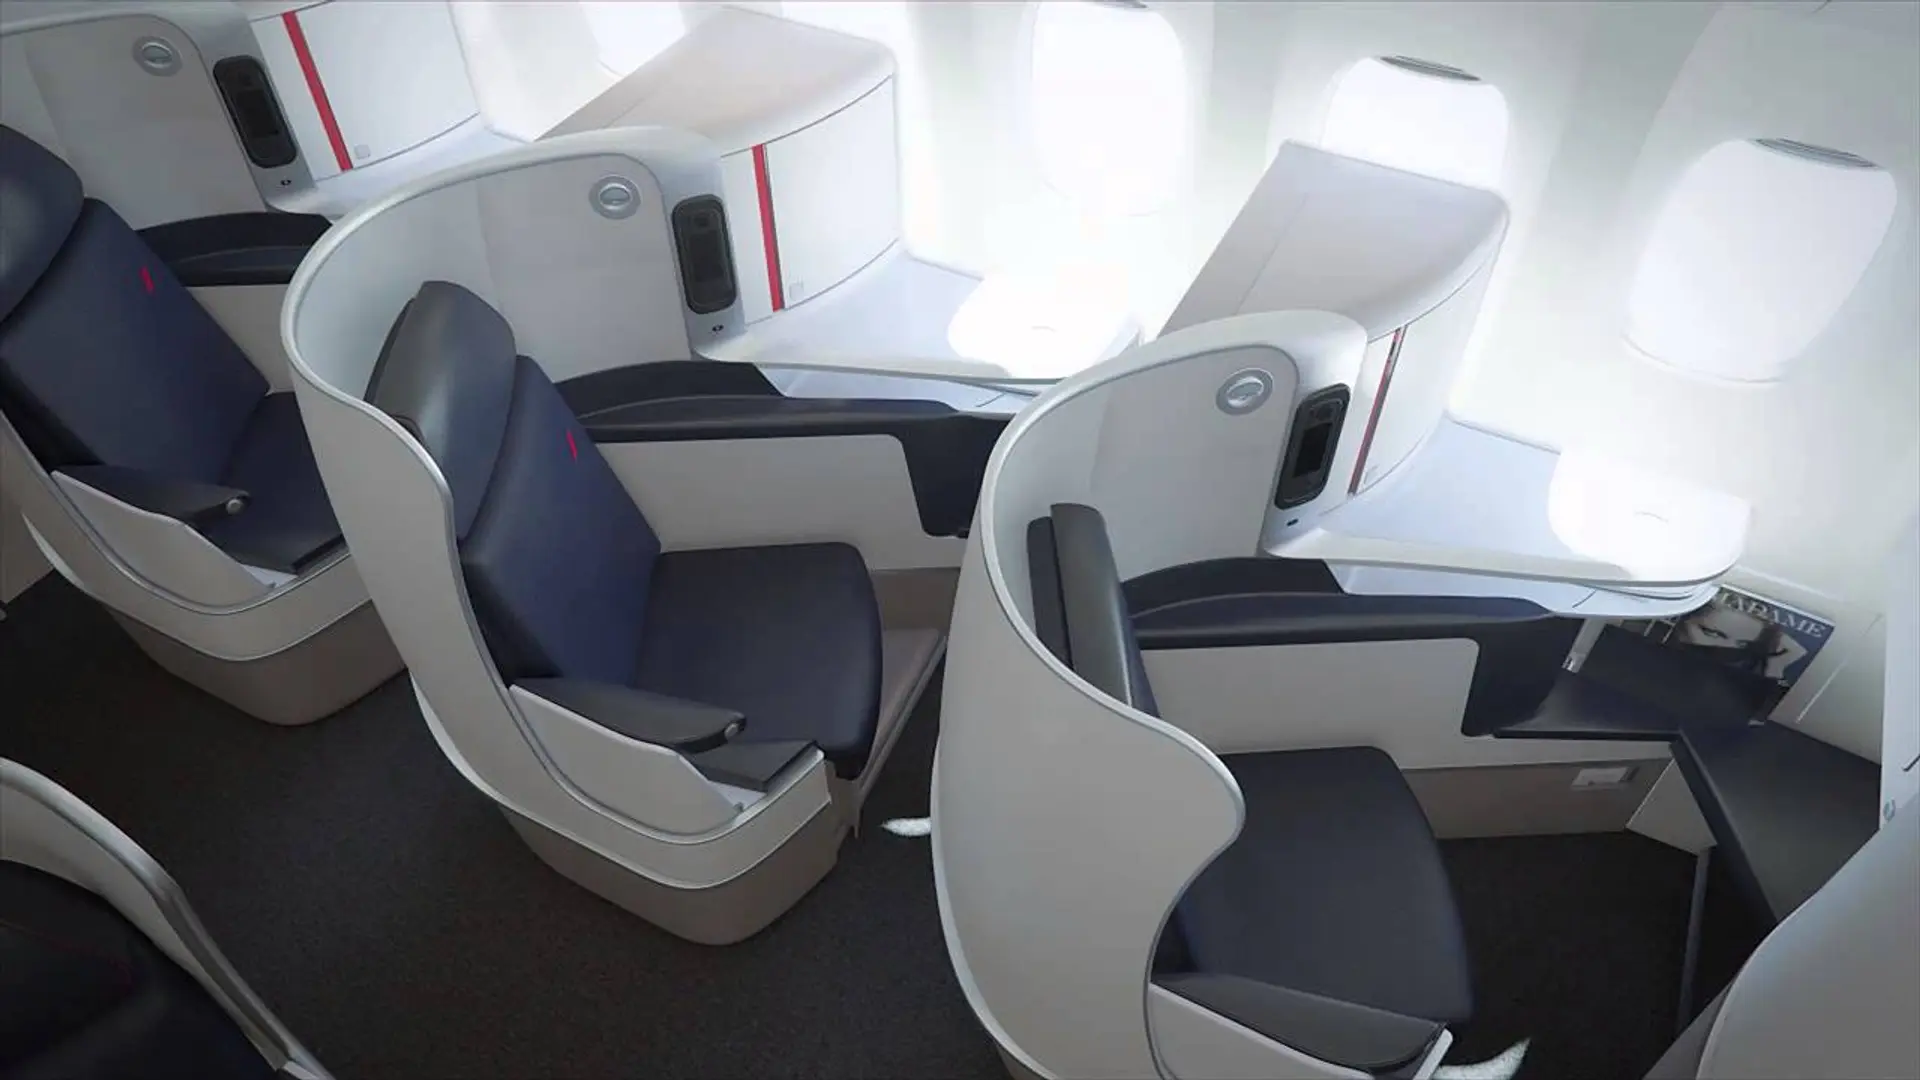 Airline review Cabin & Seat - Air France - 2